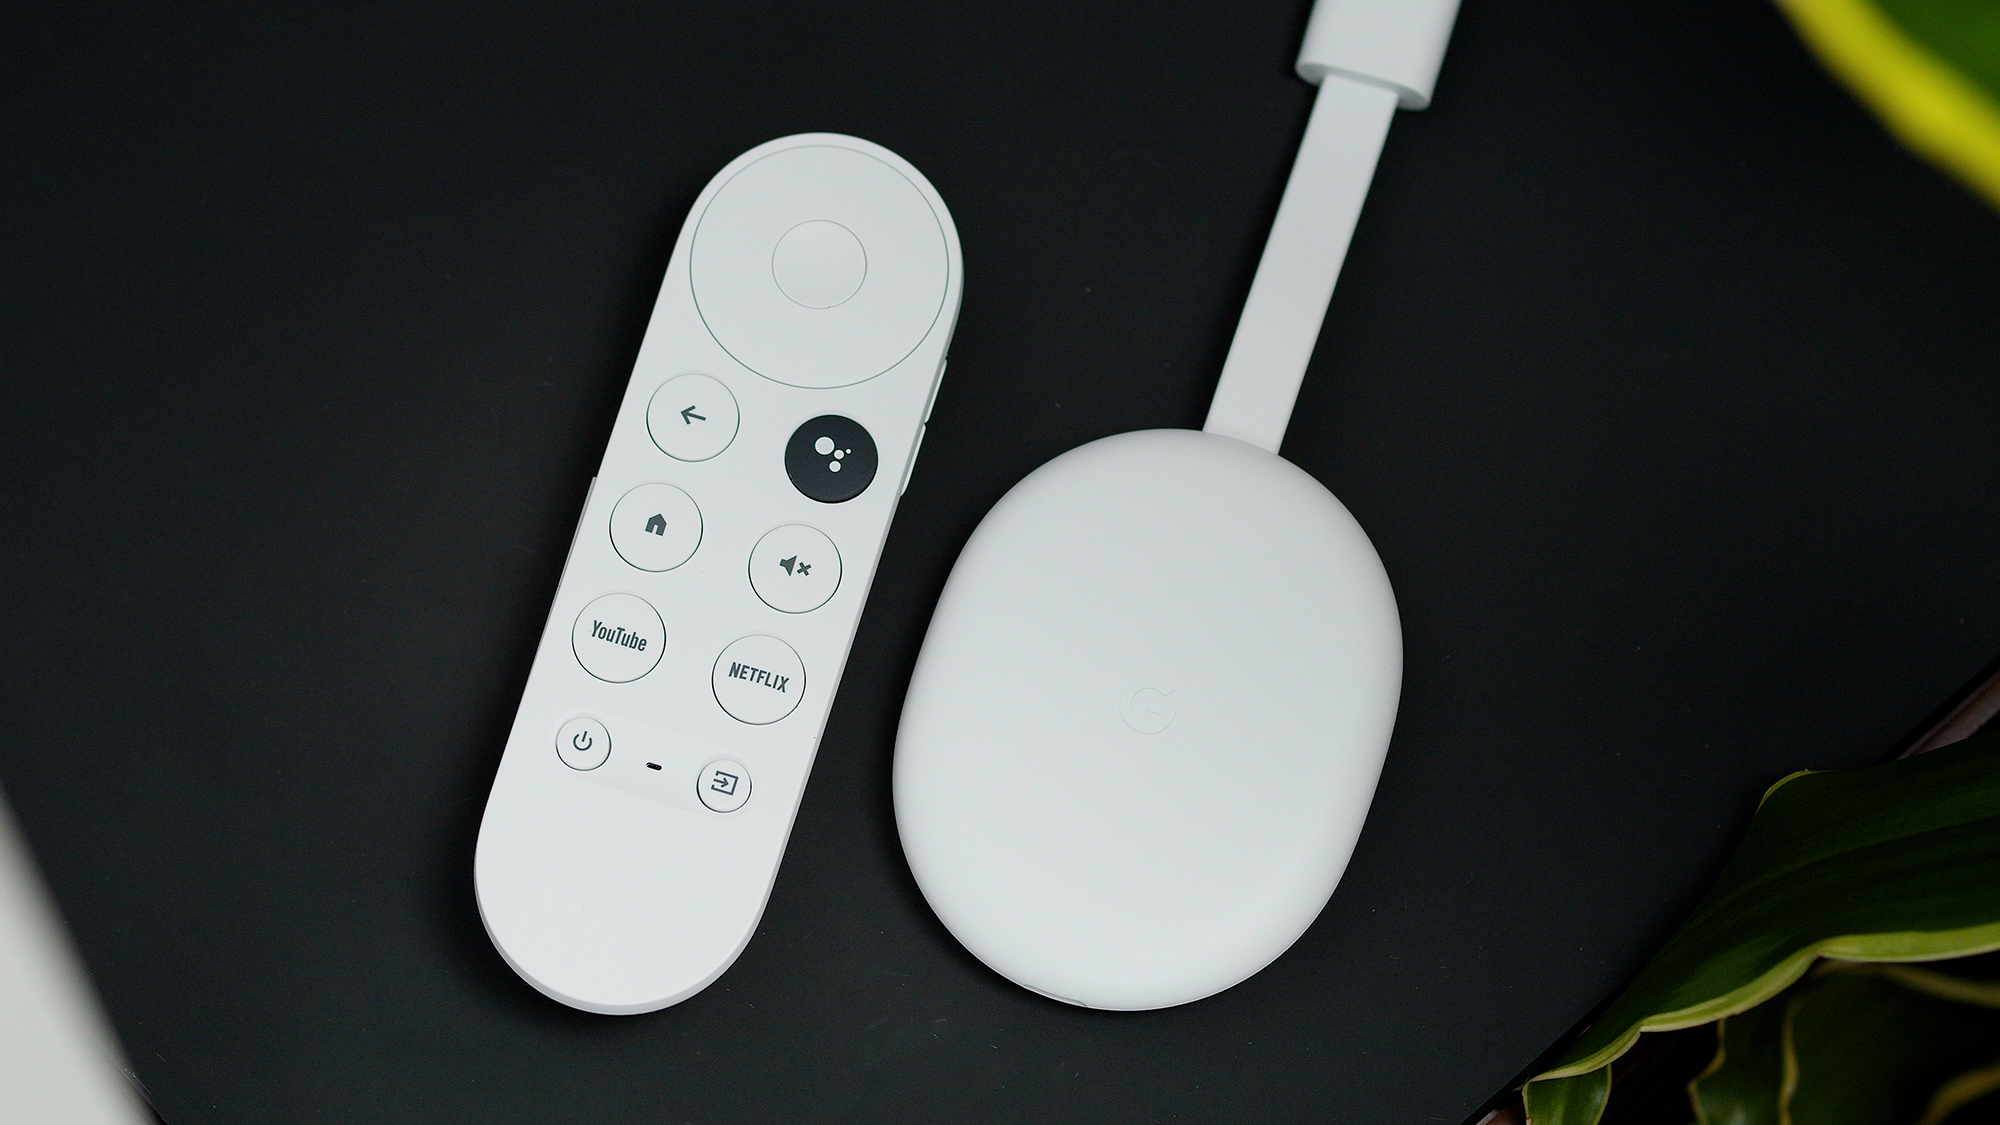 The 4K Chromecast with Google TV is back on sale for $40